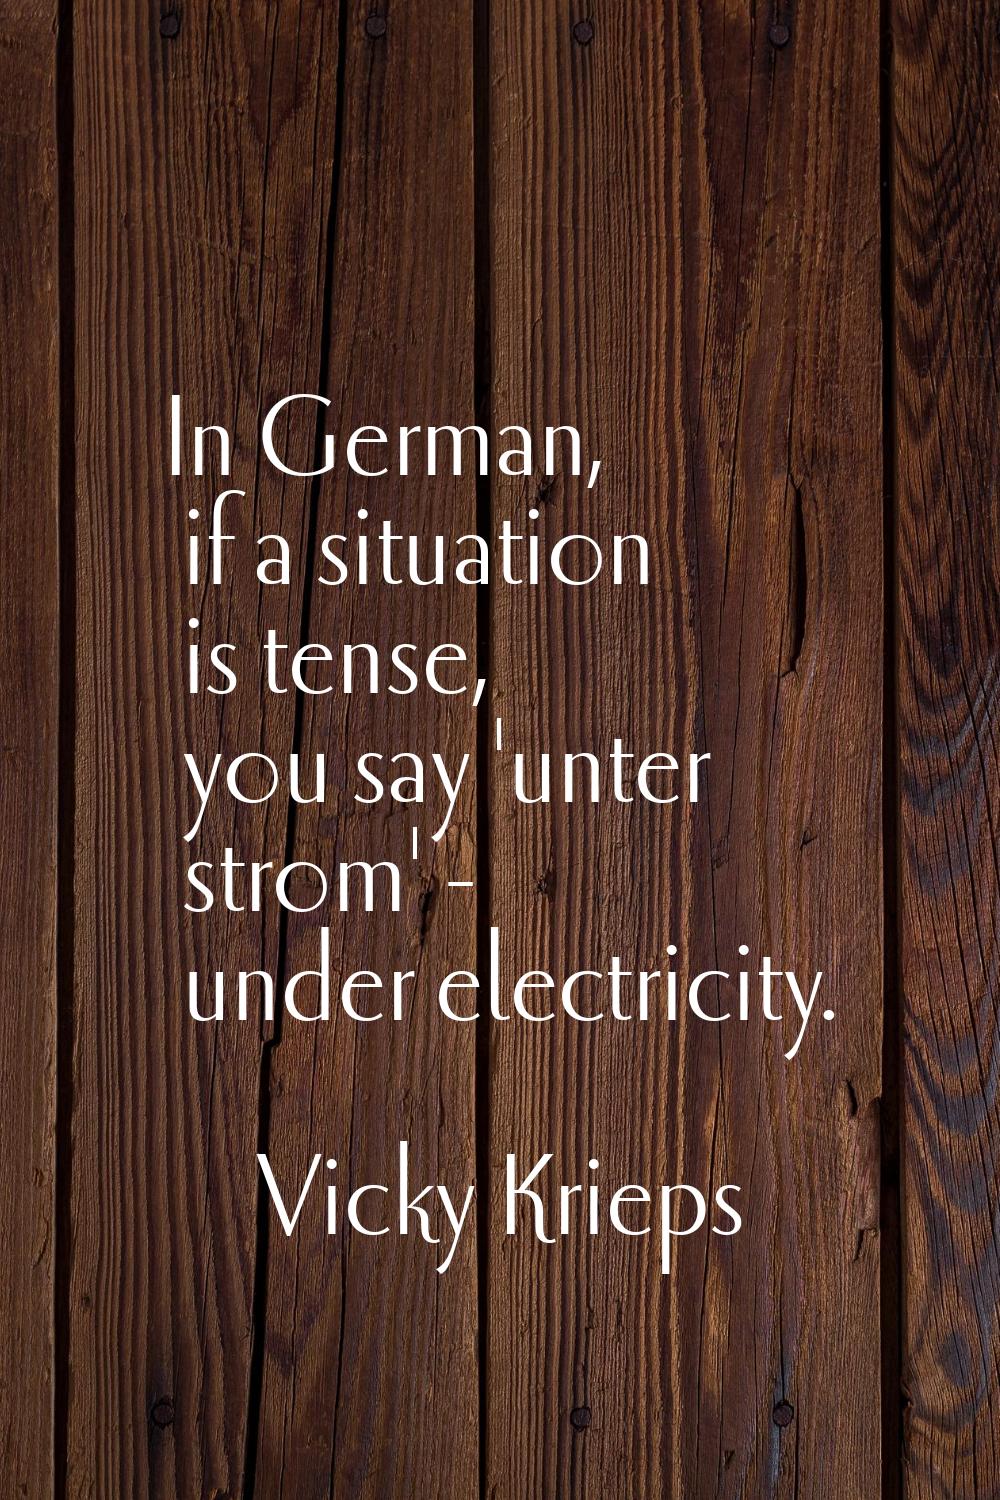 In German, if a situation is tense, you say 'unter strom' - under electricity.